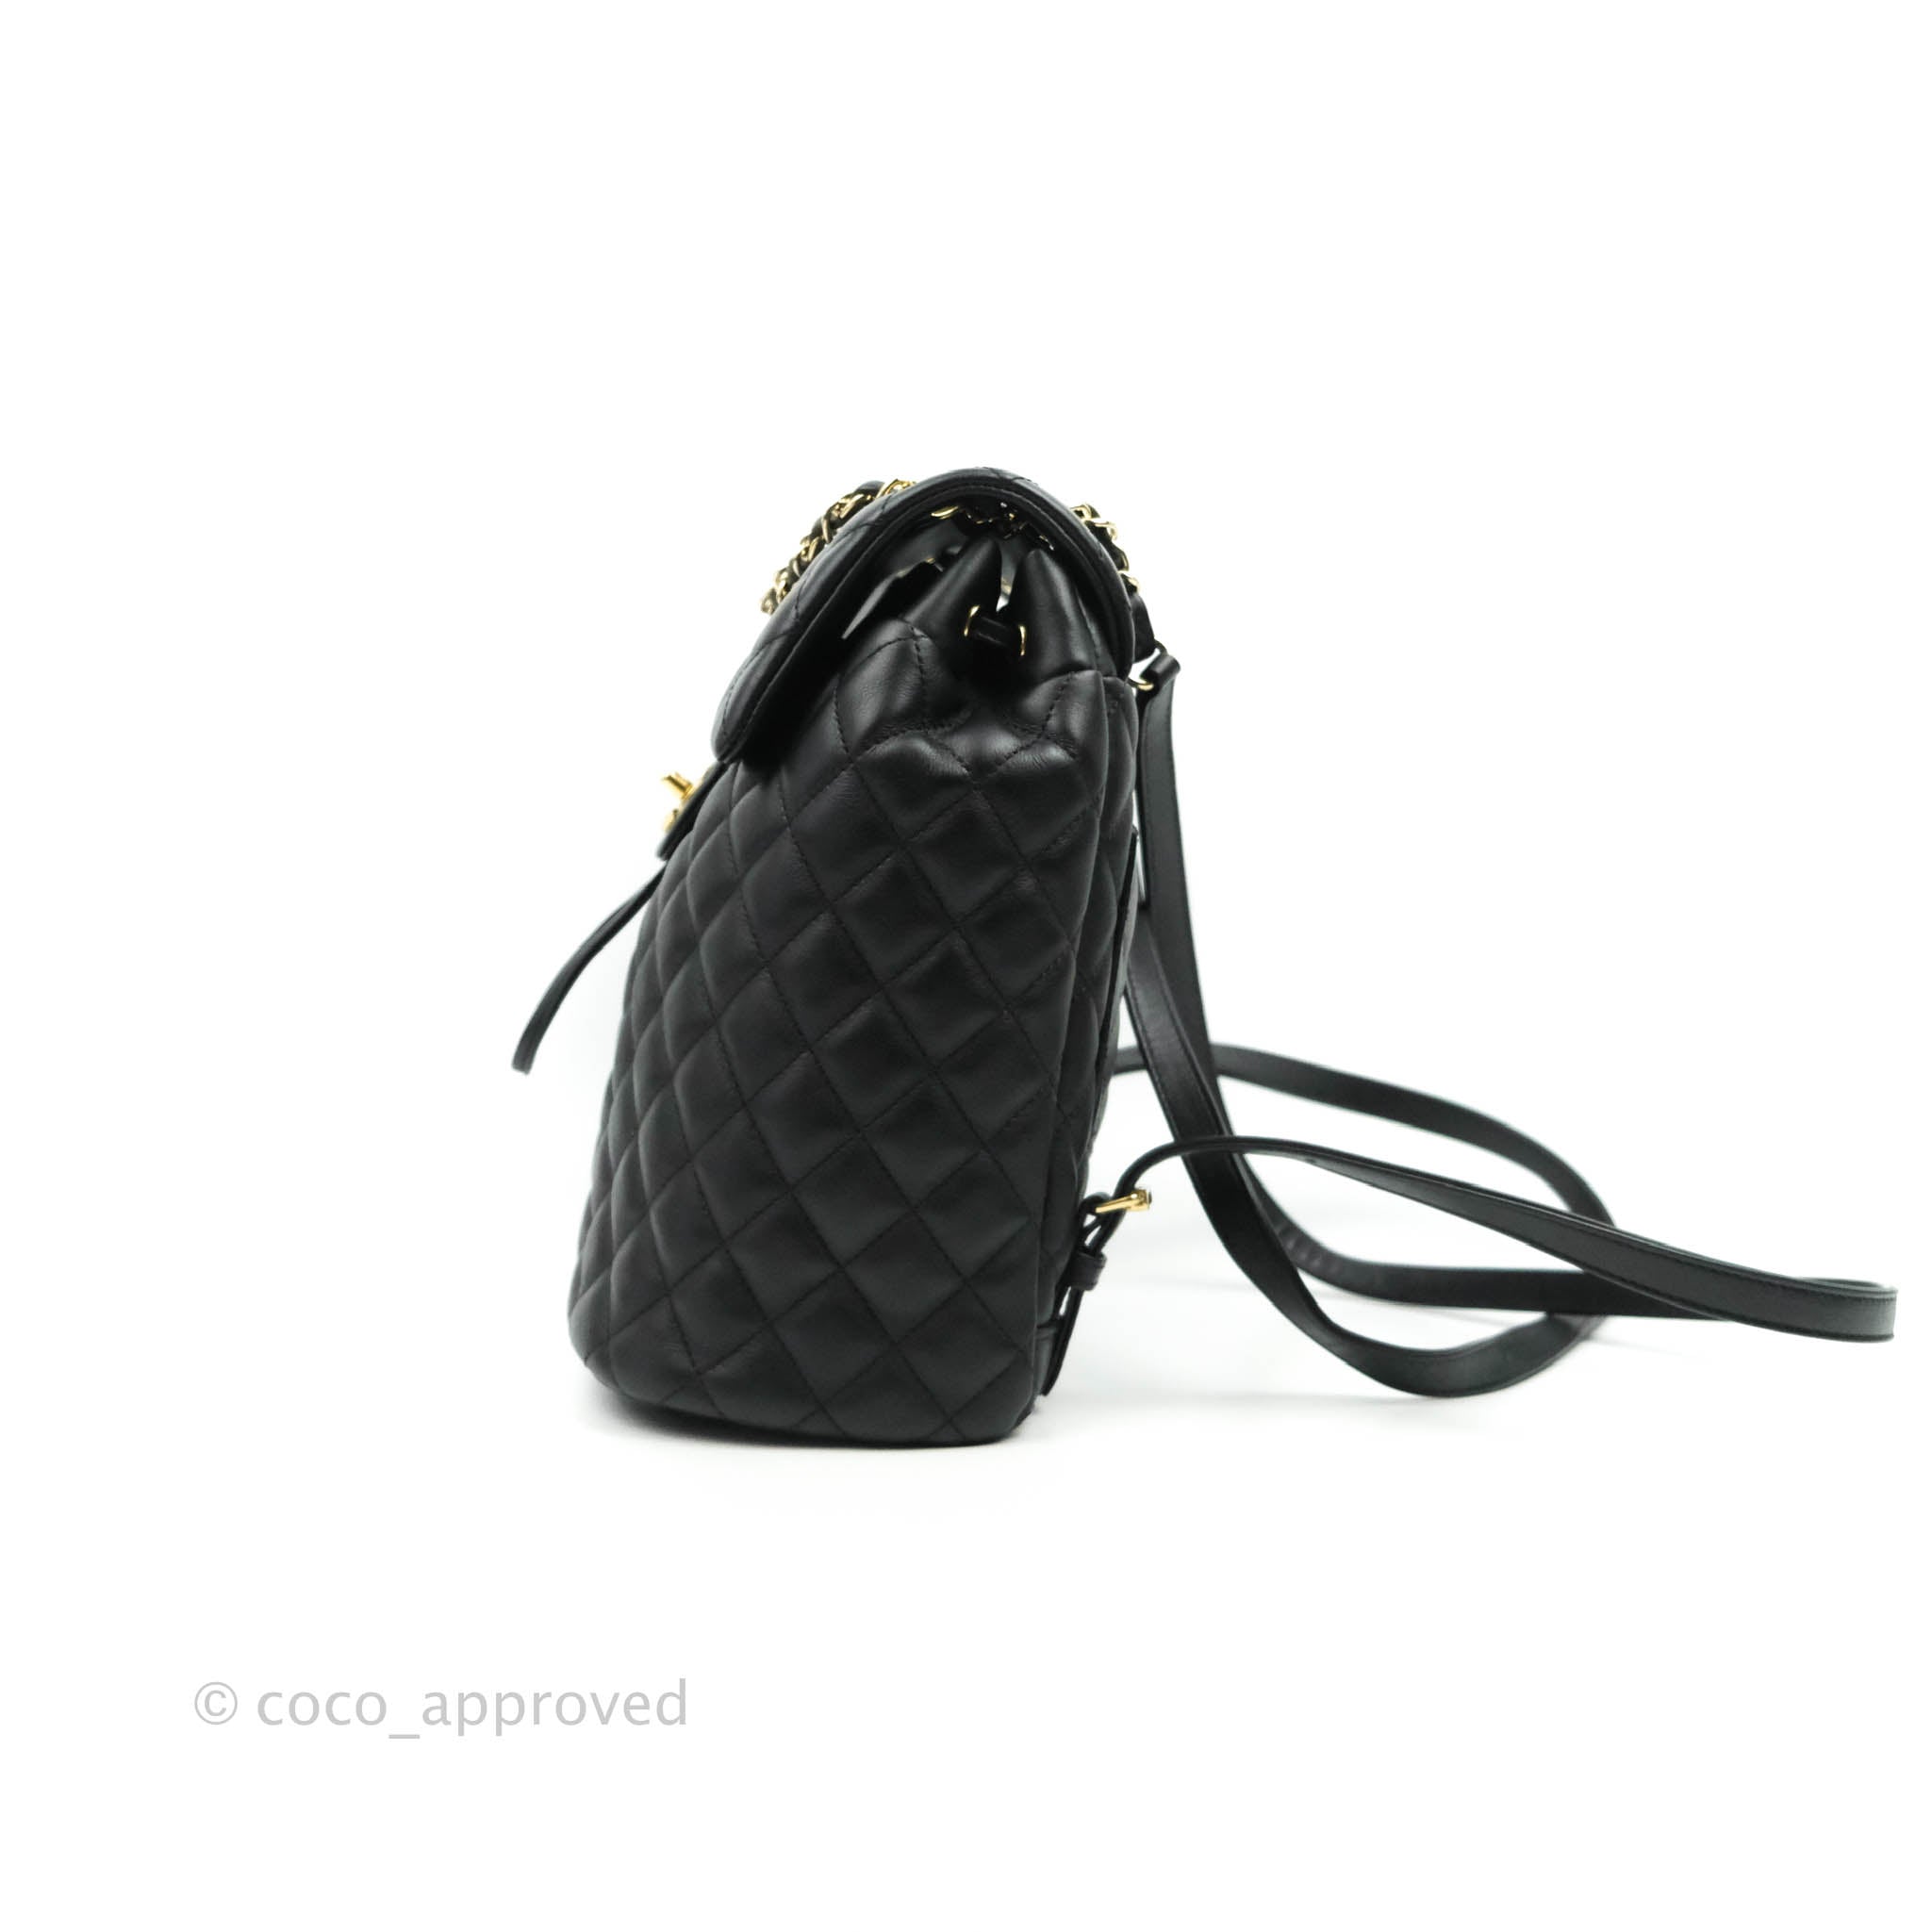 CHANEL Pre-Owned Urban Spirit diamond-quilted Denim Backpack - Farfetch